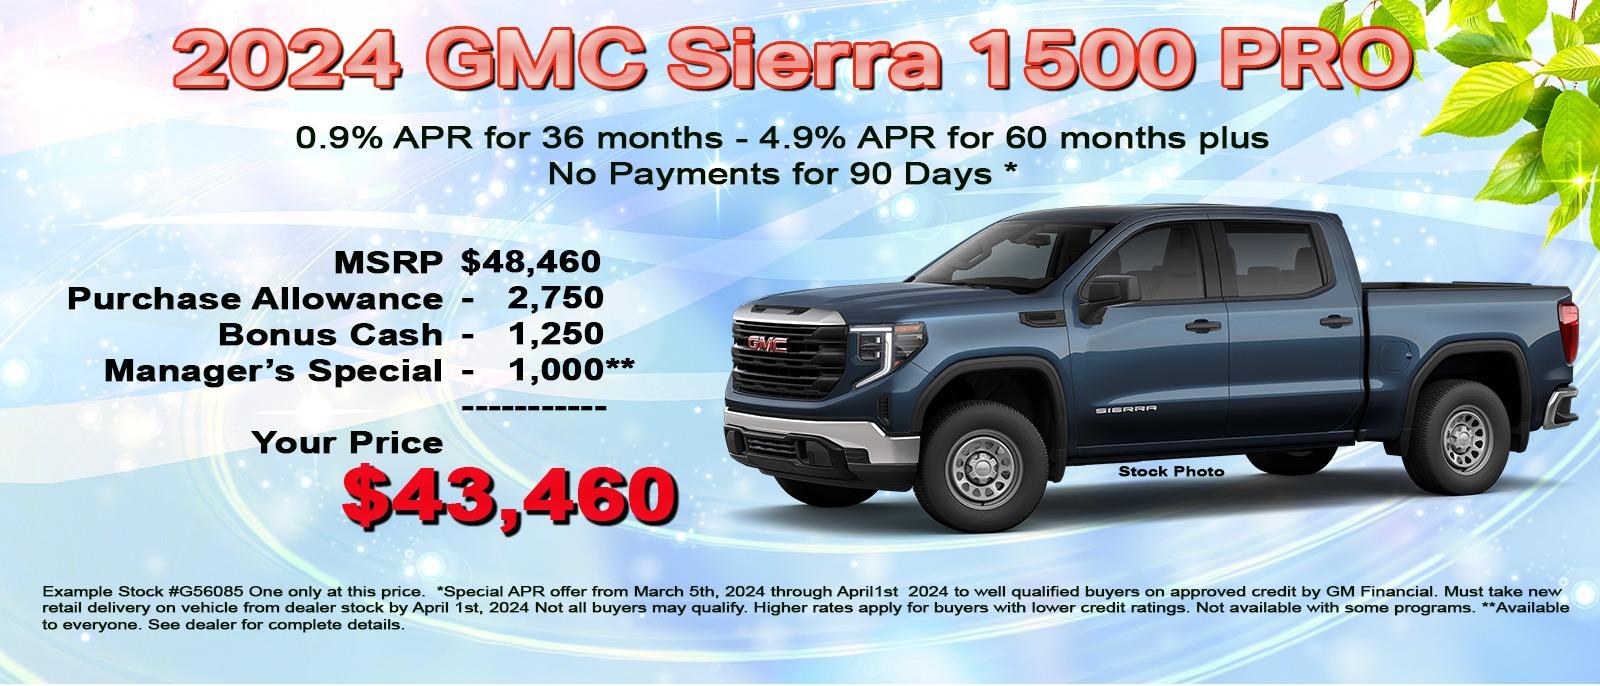 Save $5000 on your new 2024 GMC Sierra now